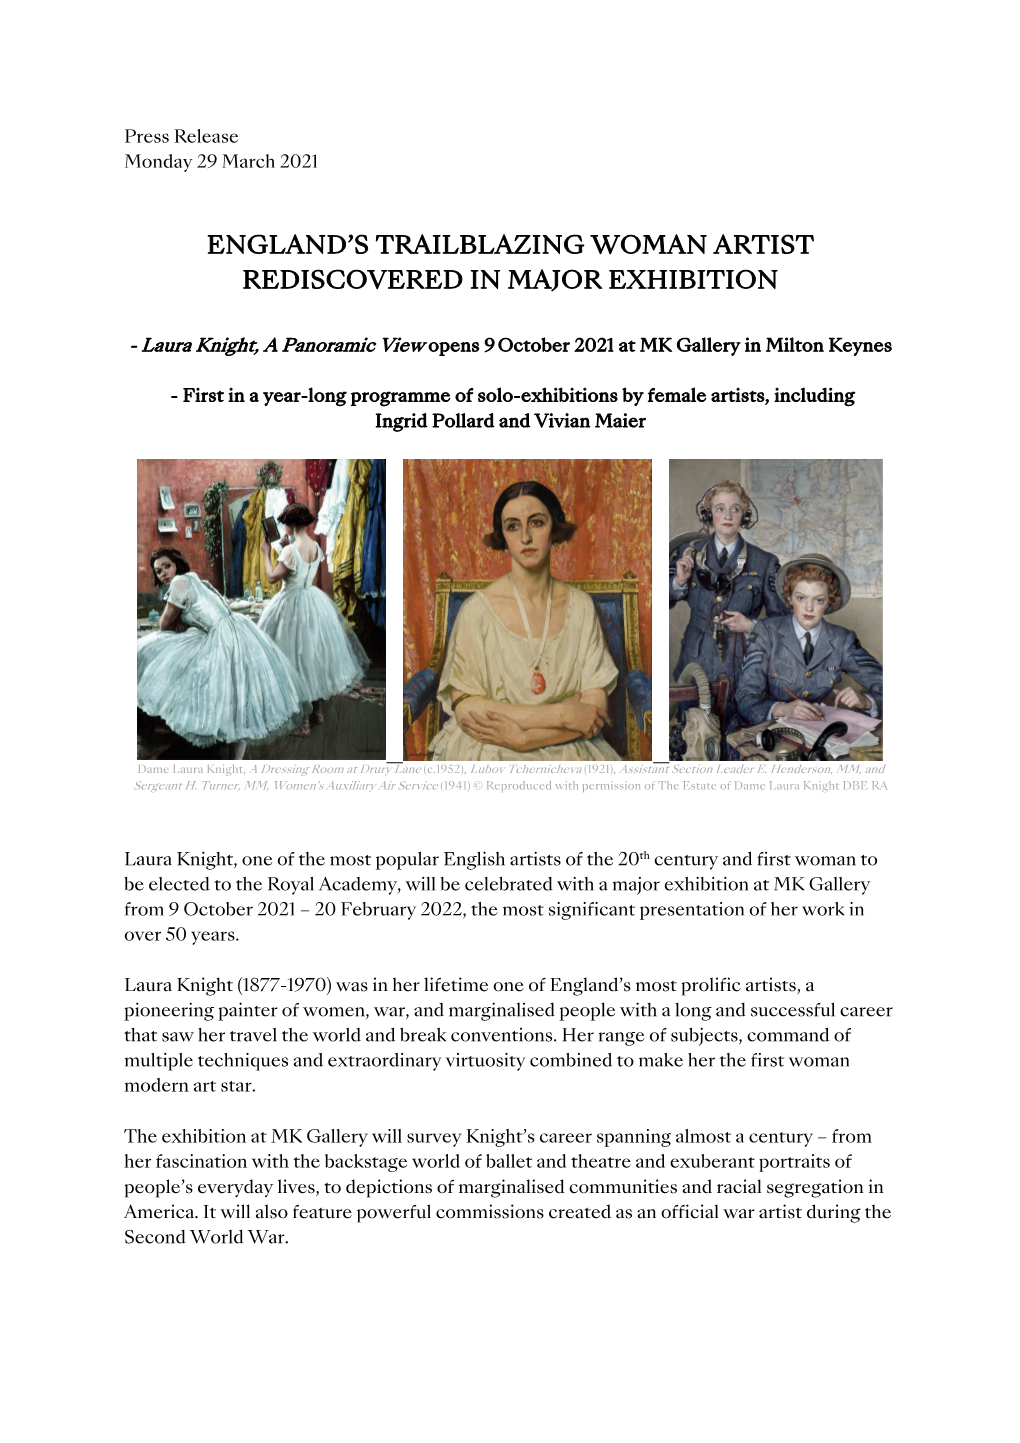 England's Trailblazing Woman Artist Rediscovered In